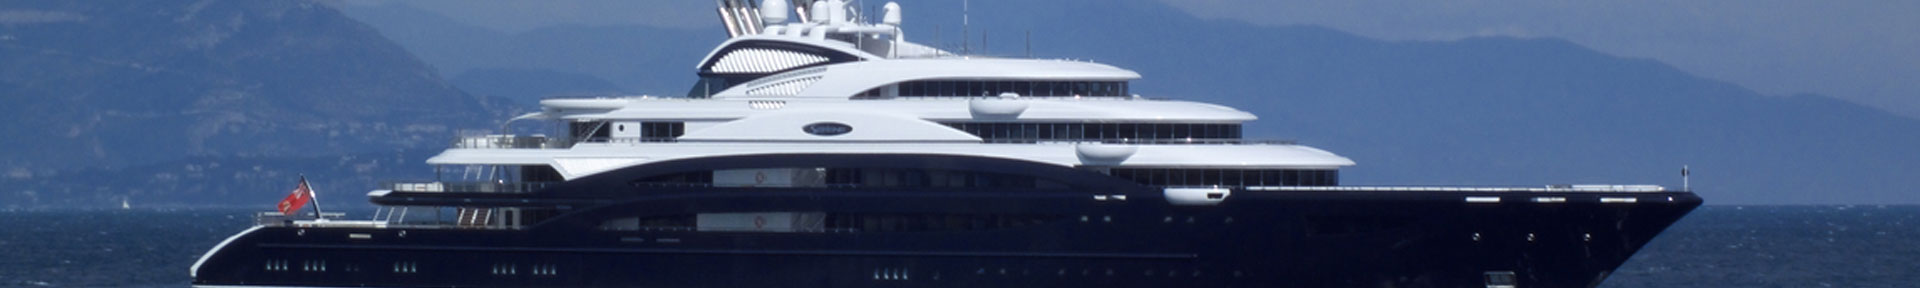 A superyacht with a dark blue hull at anchor